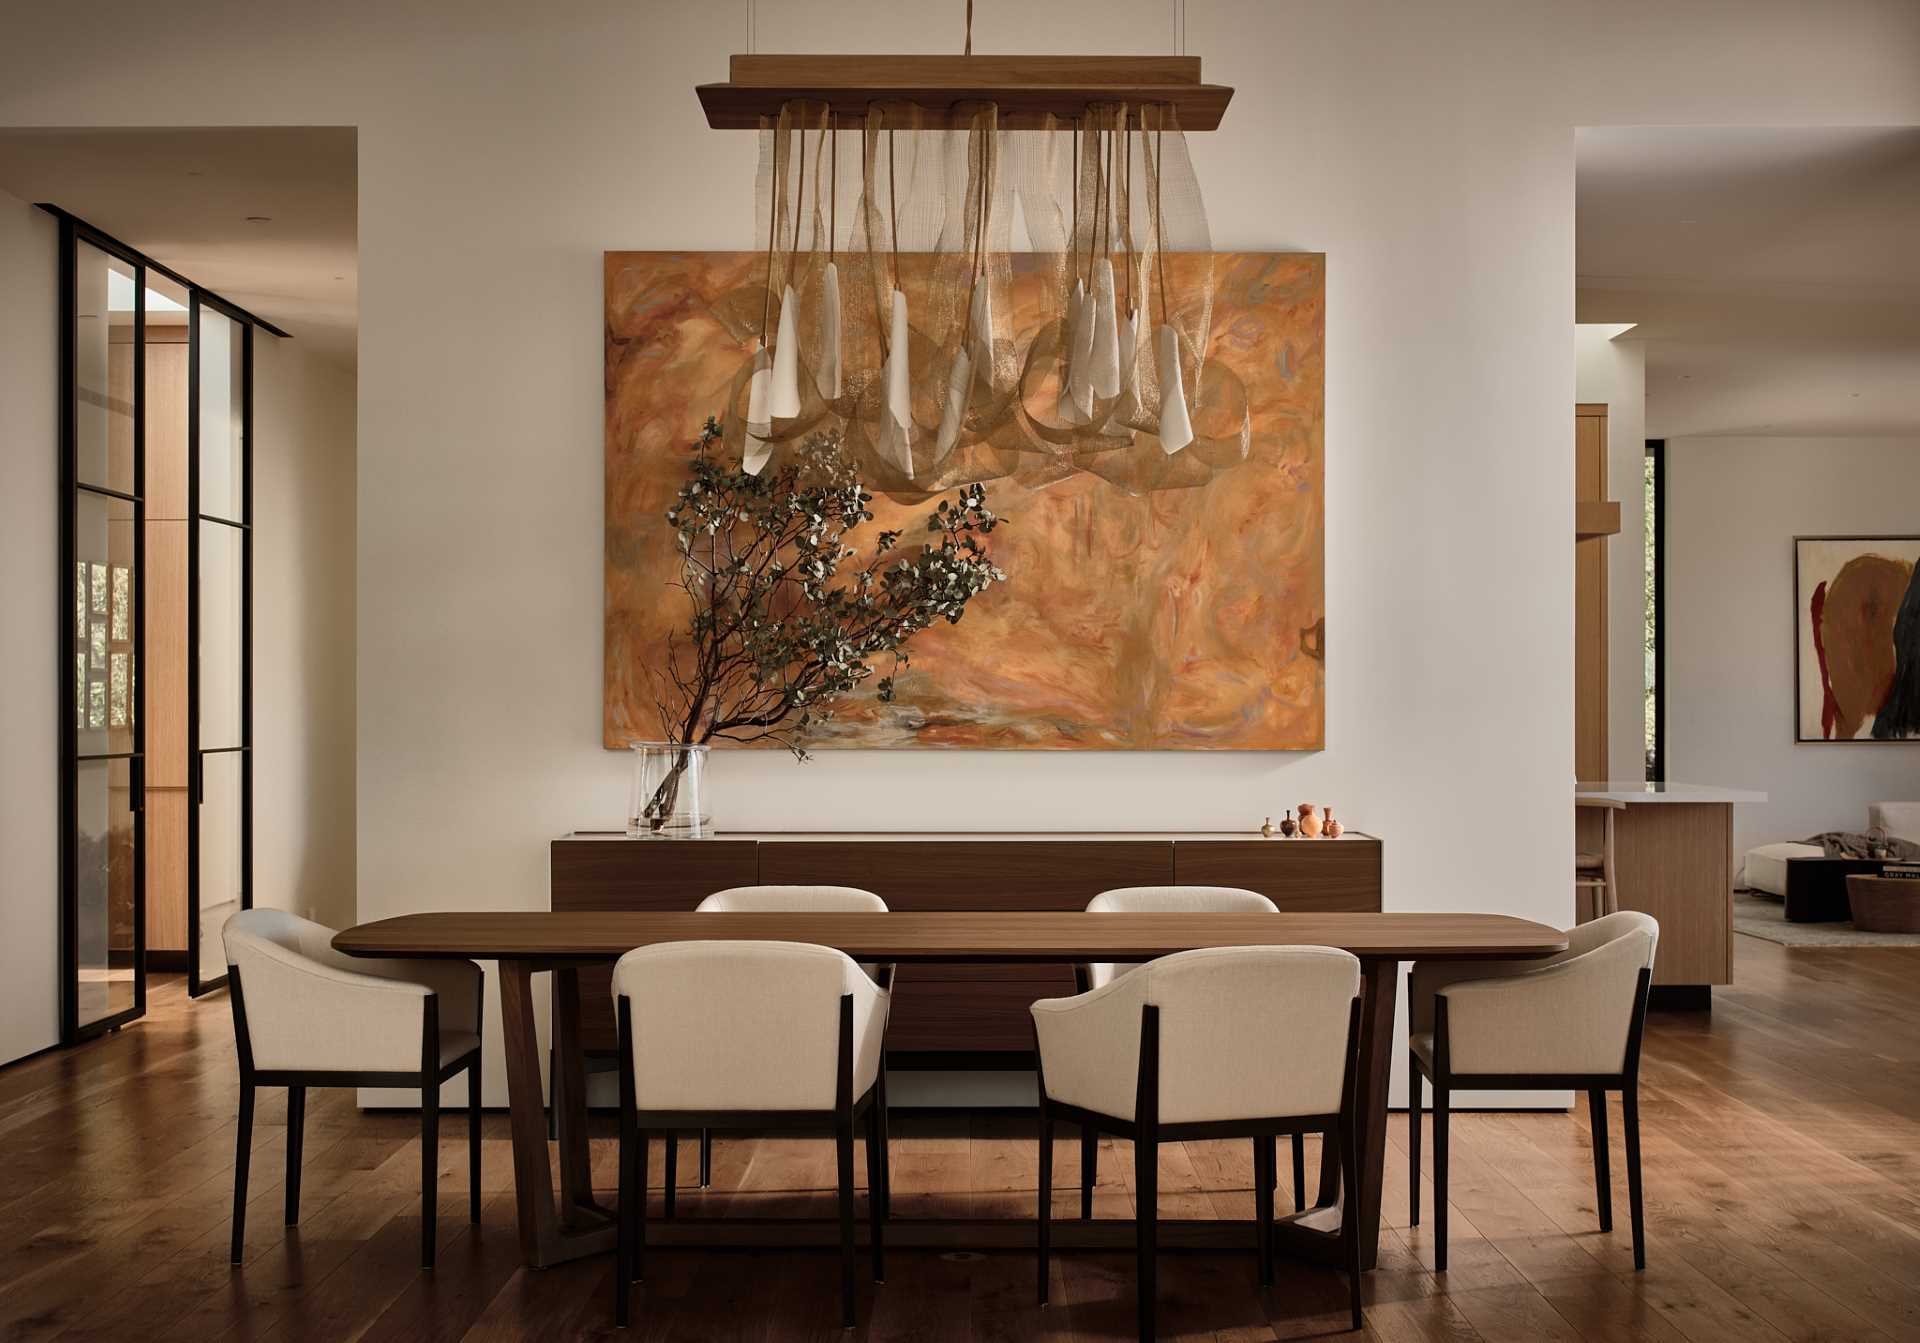 In a formal dining area, a wood table is surrounded by contemporary chairs, while a sculptural light hangs above the table and a large art piece hangs on the wall.